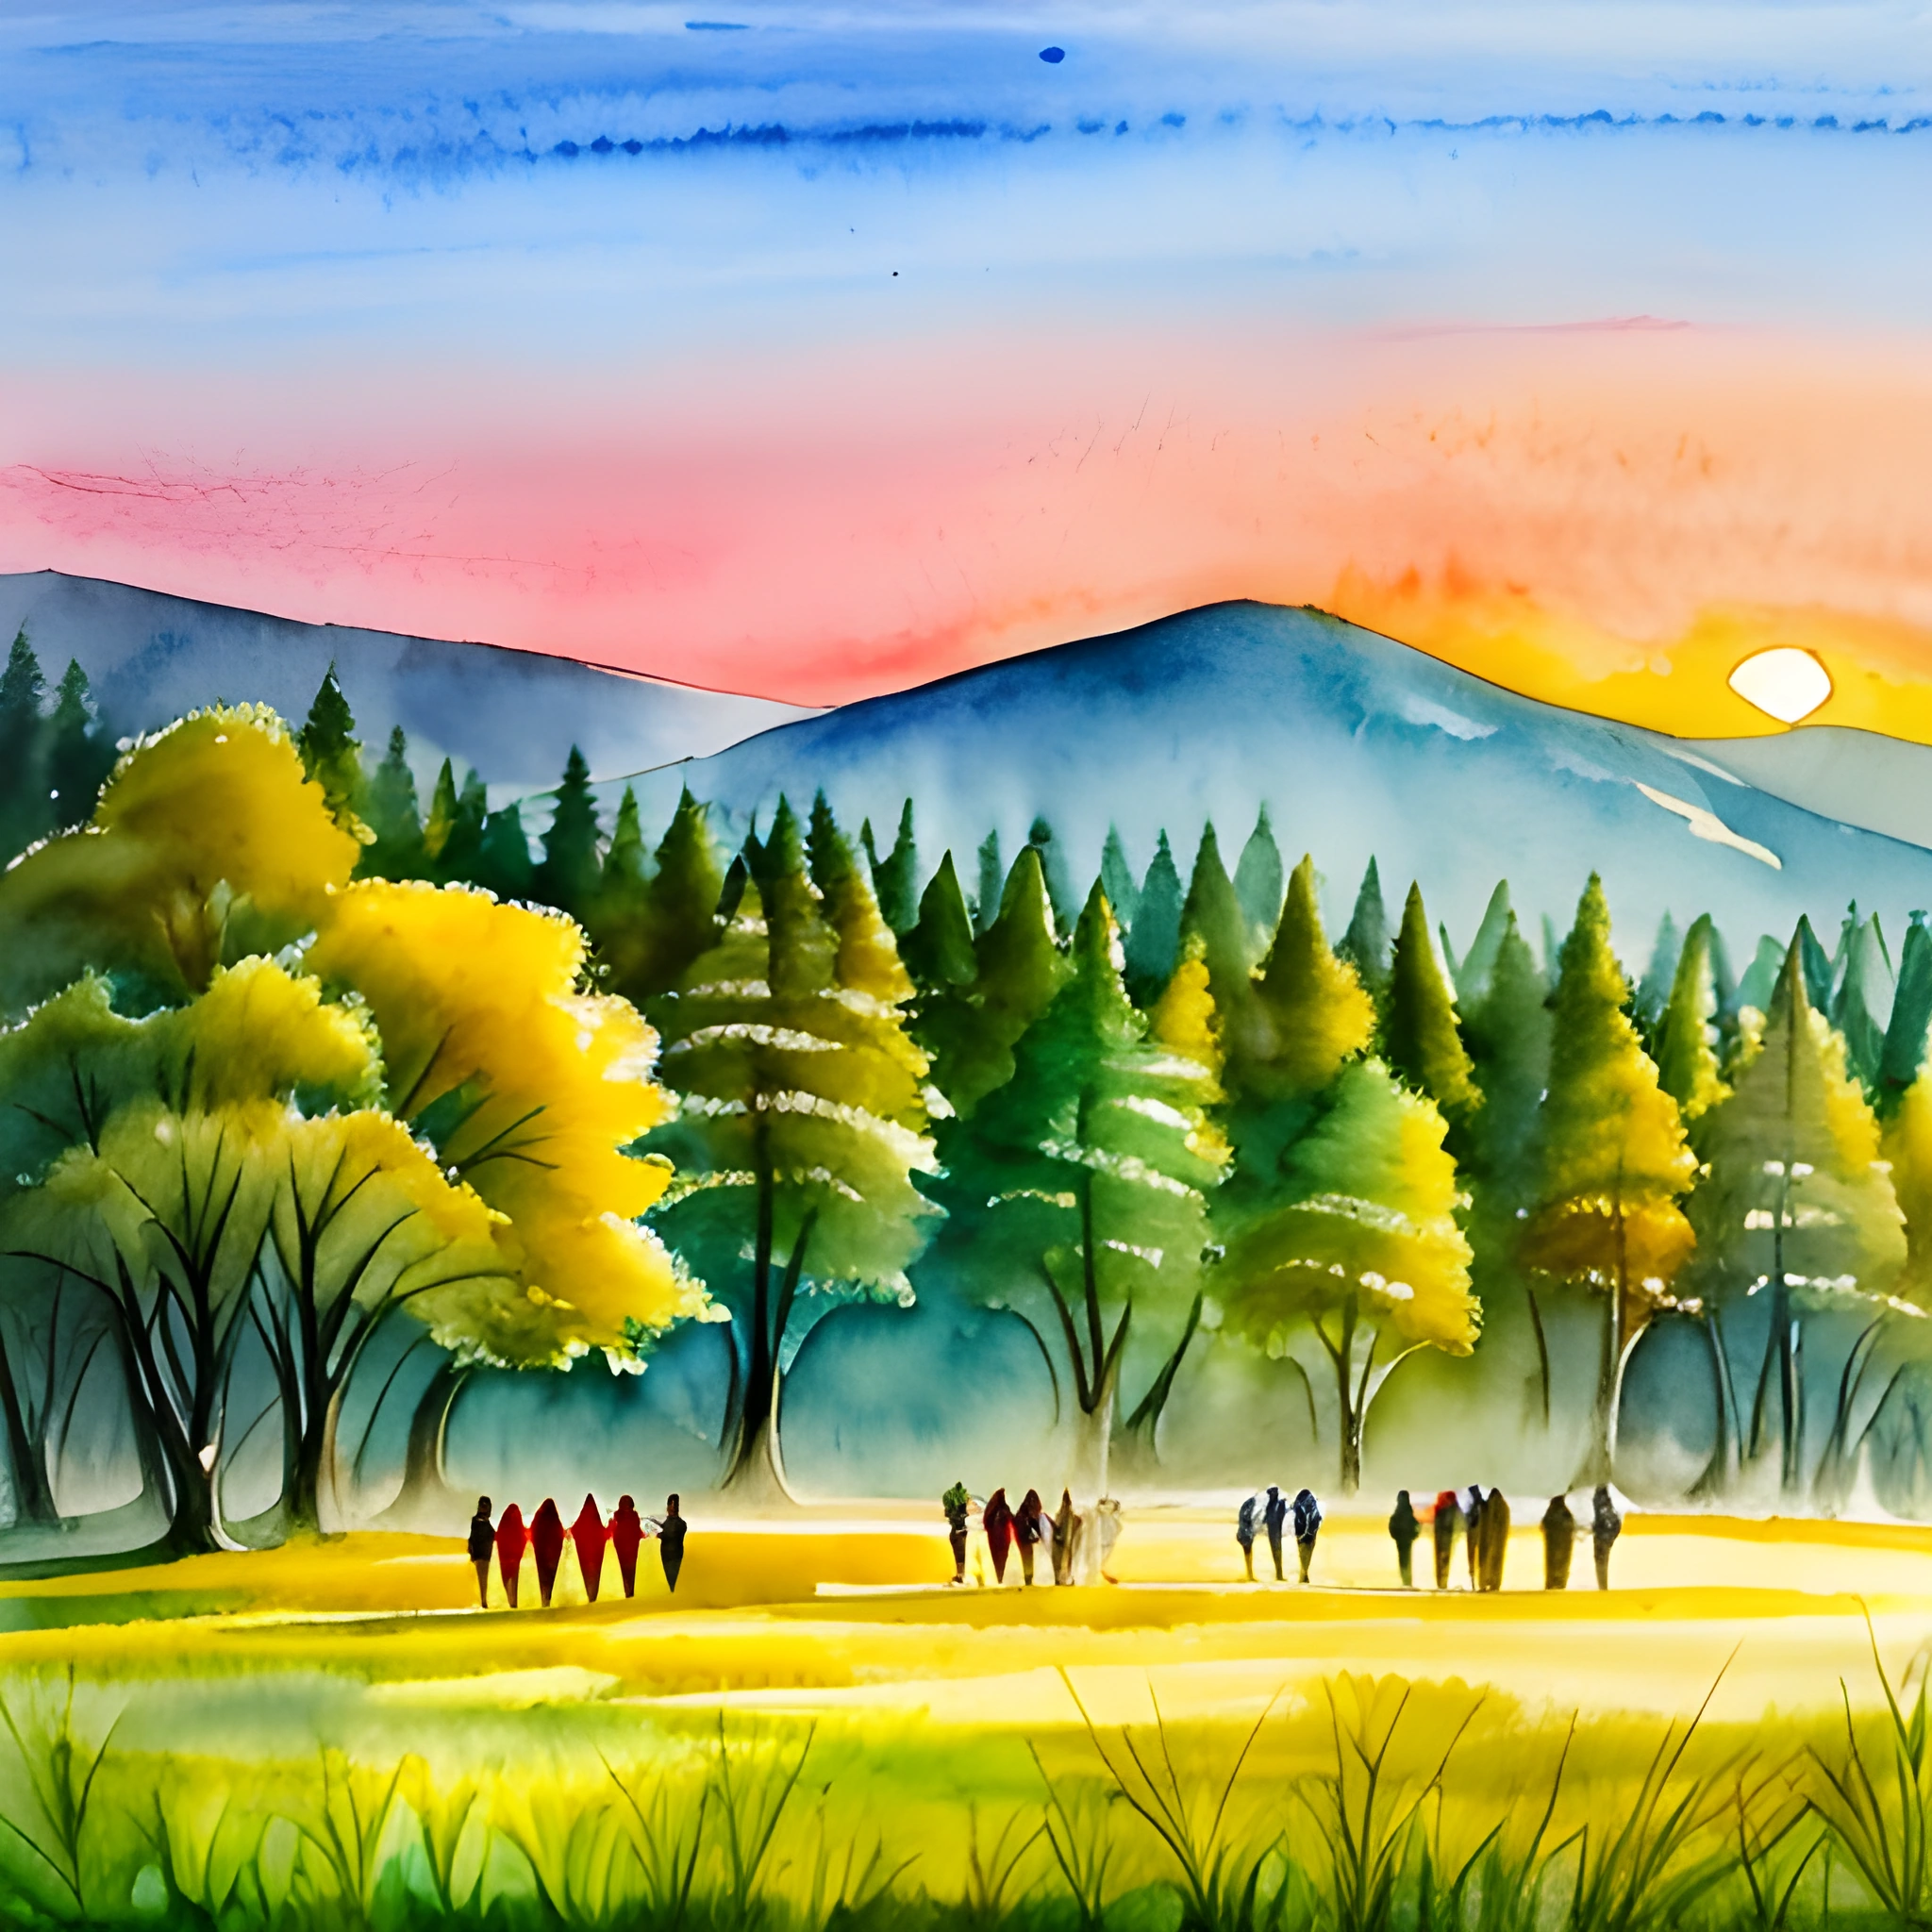 painting of a group of people walking in a field with trees